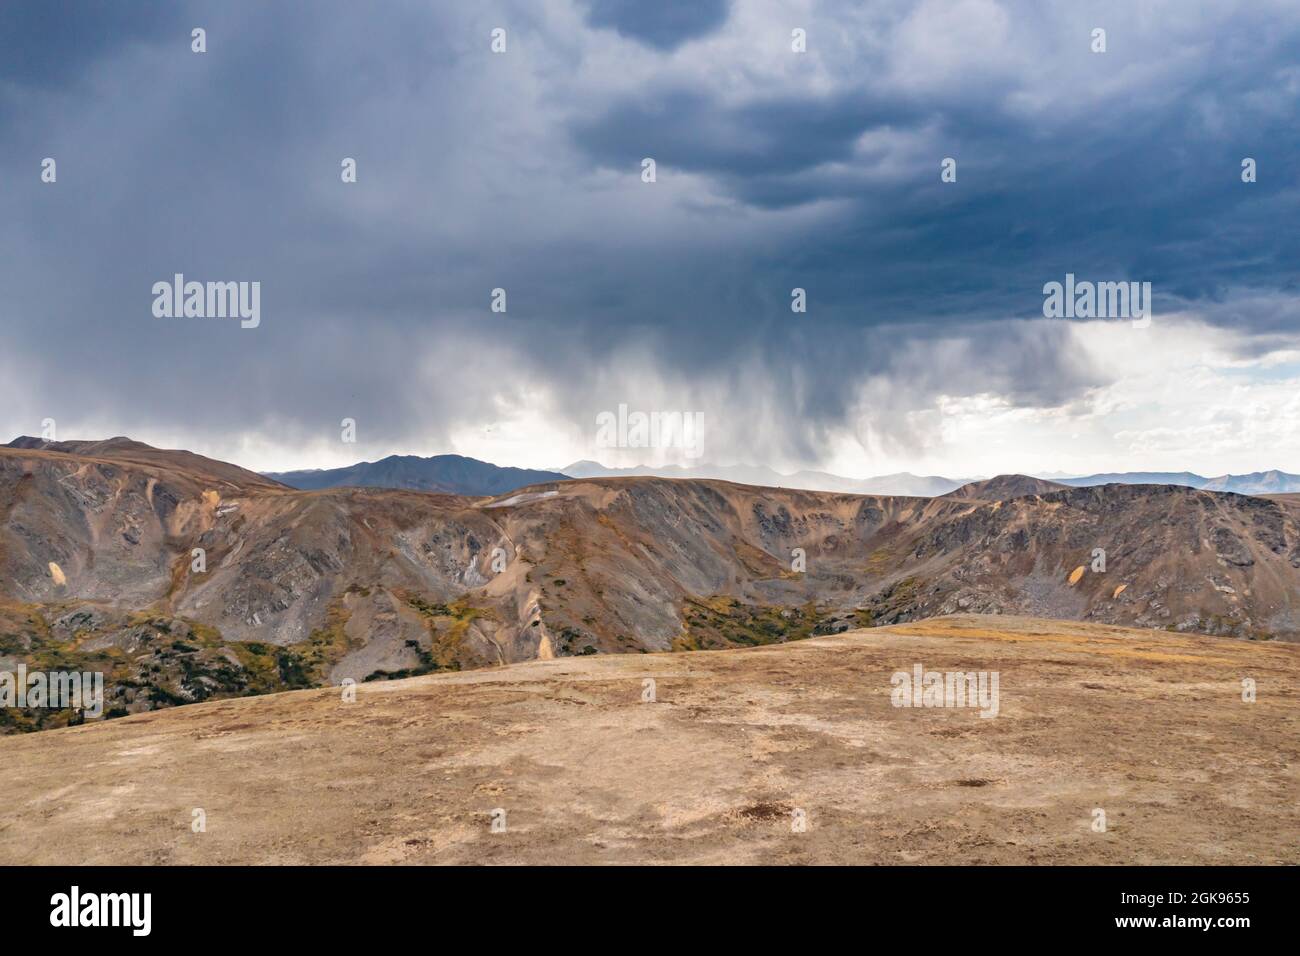 Developing Thunderstorm over Rocky Mountains in Colorado Stock Photo